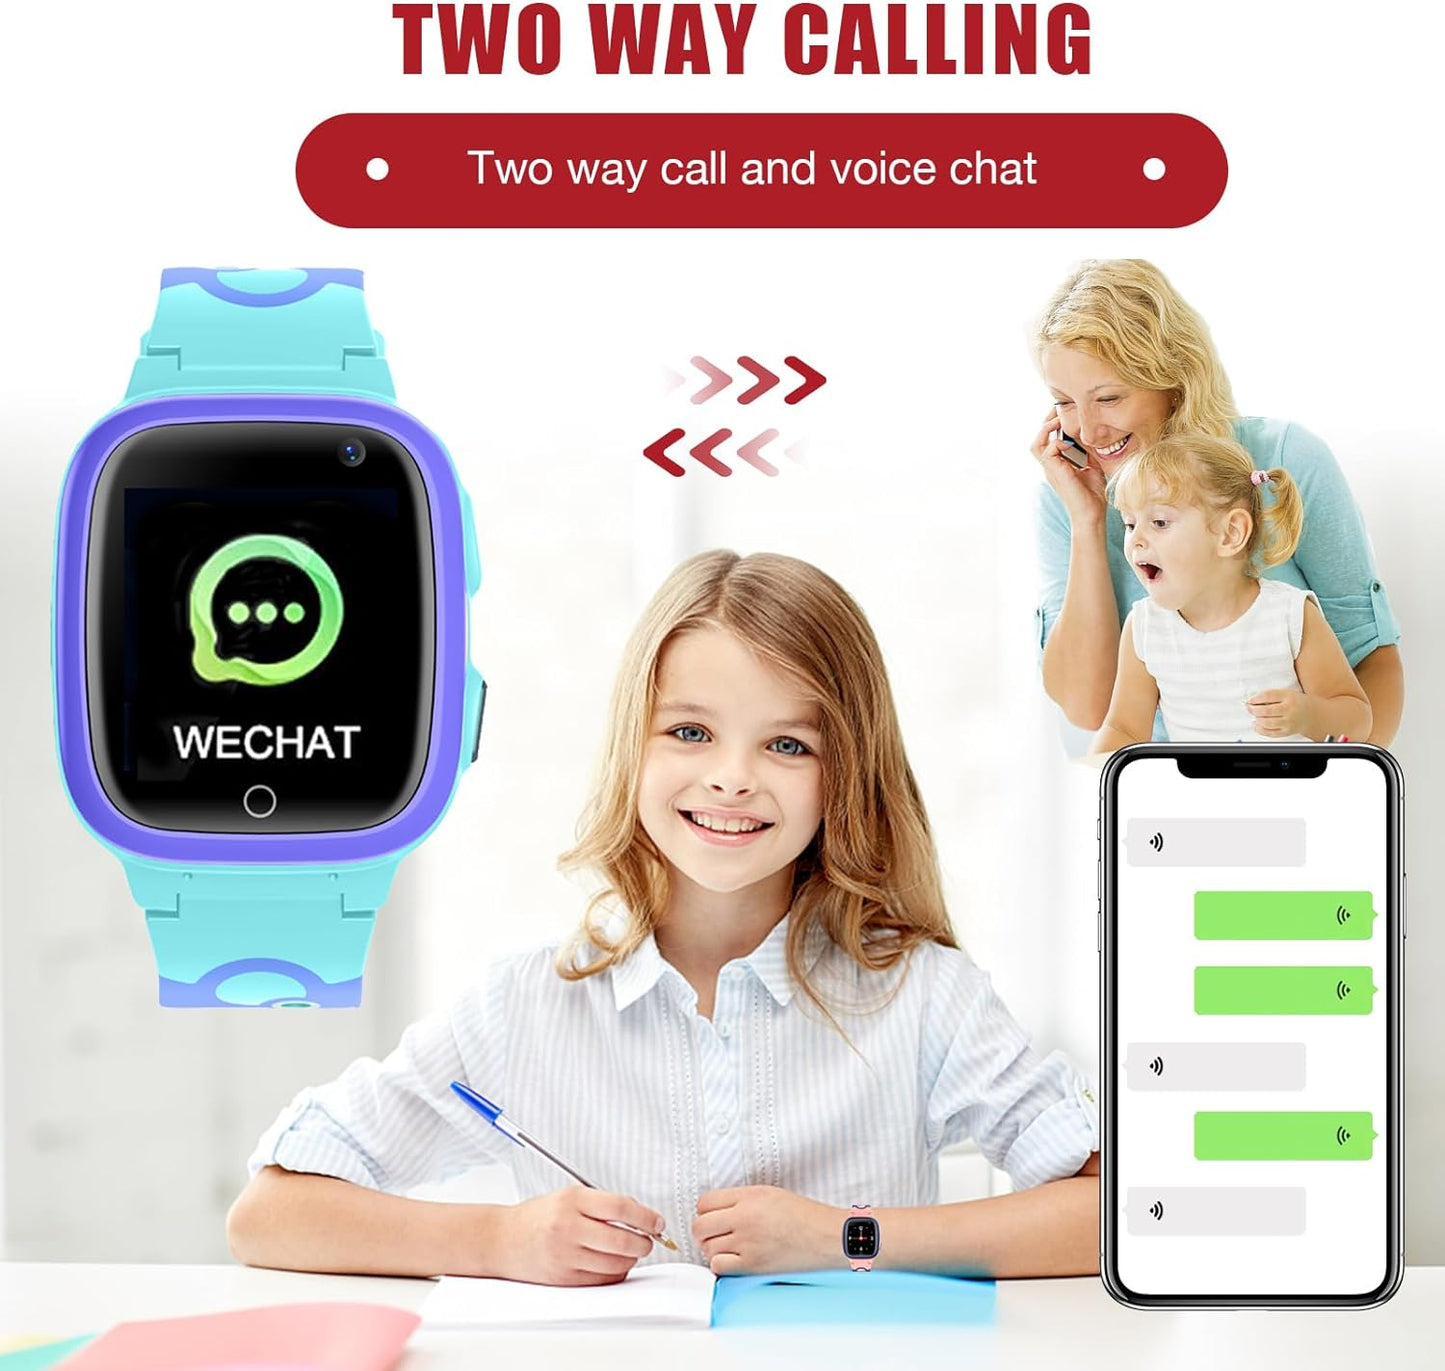 Kids Smart Watch LBS Tracker - Smartwatches for Children Kids with SOS Weather Stopwatch Call Camera Touch Screen Game Alarm for Boys and Girls